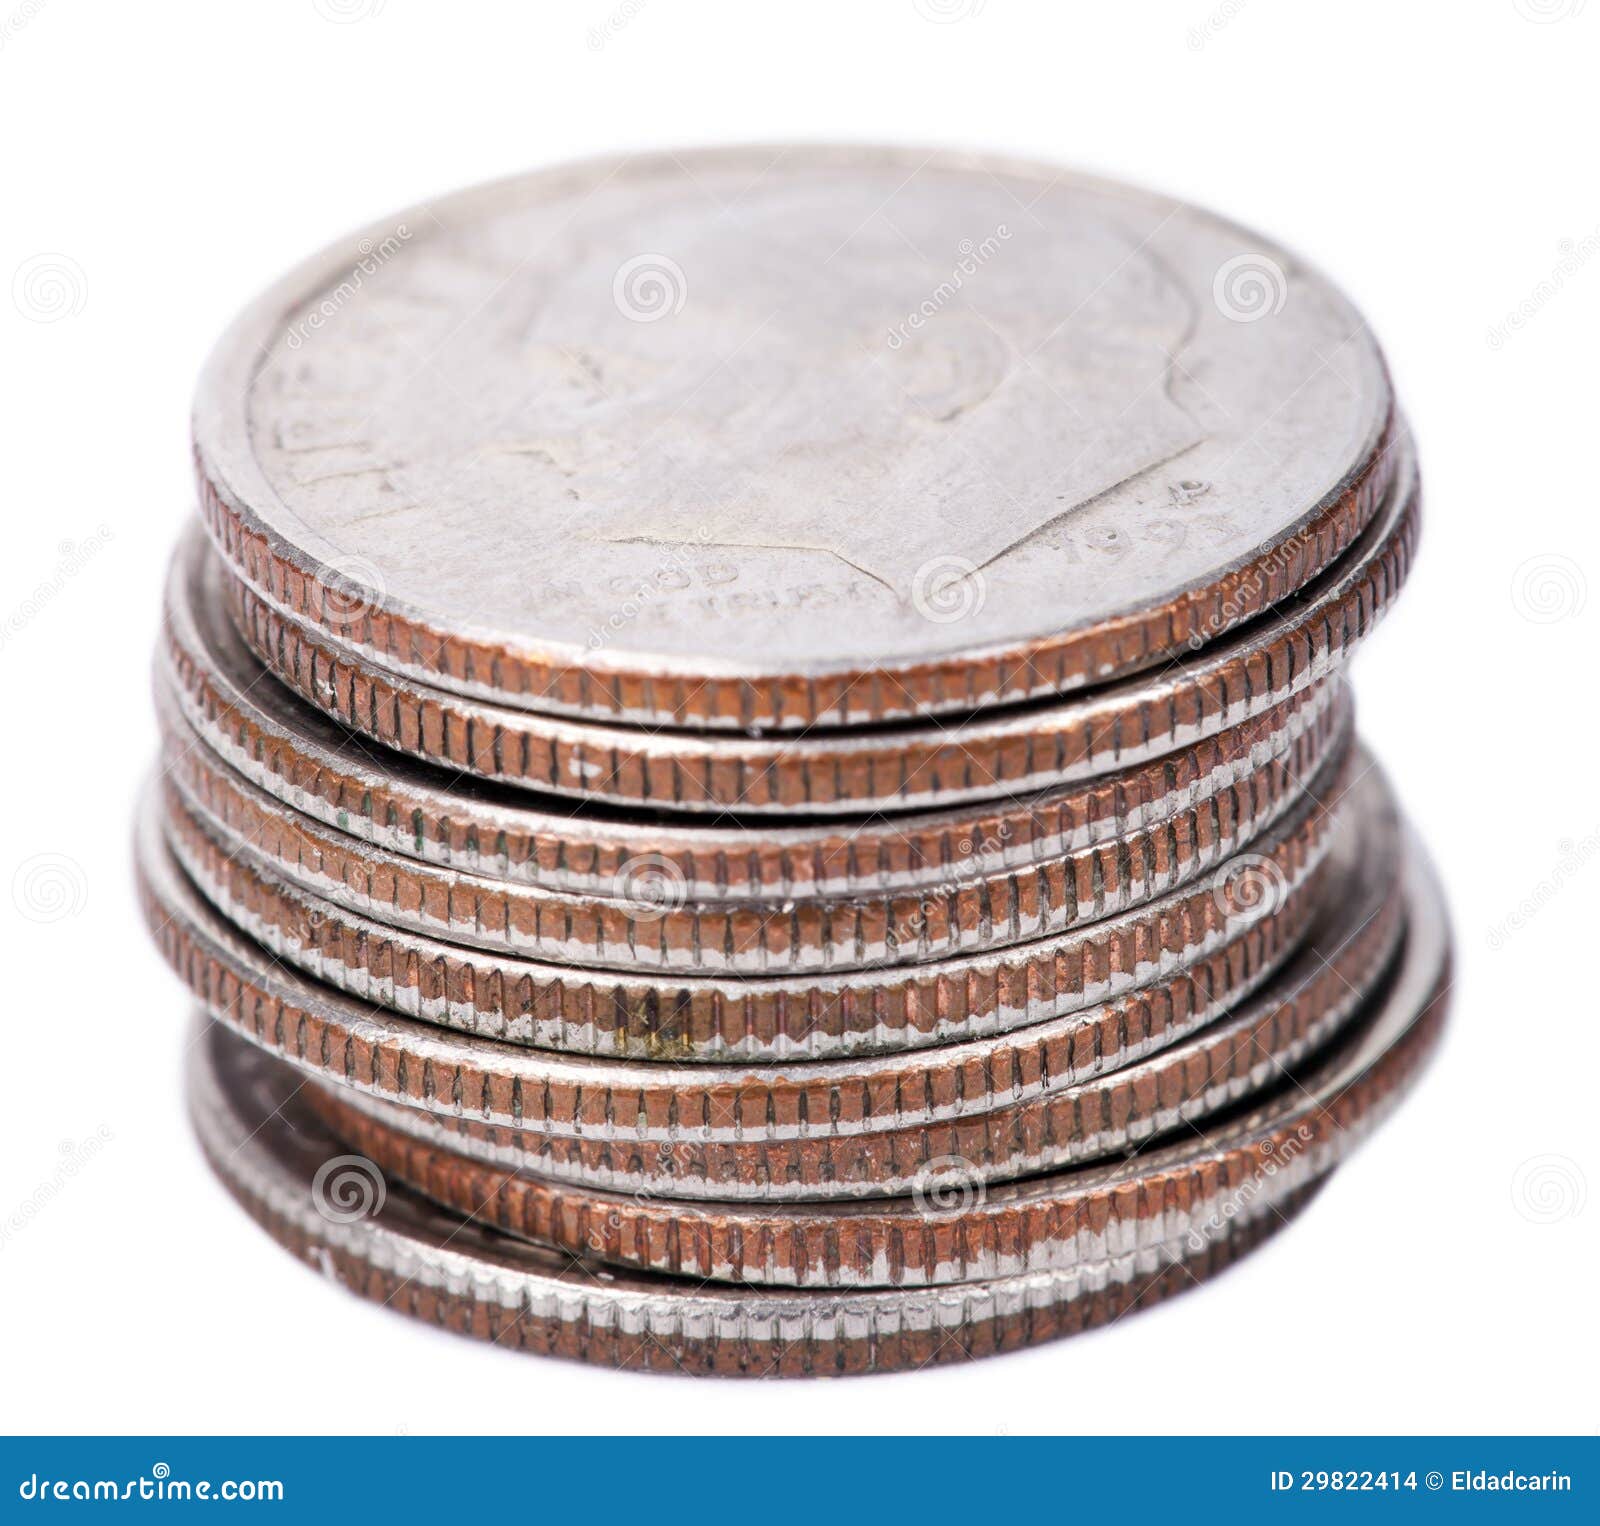 stack-american-dimes-cents-isolated-white-background-roosevelt-dime-originally-issued-focus-front-stack-29822414.jpg